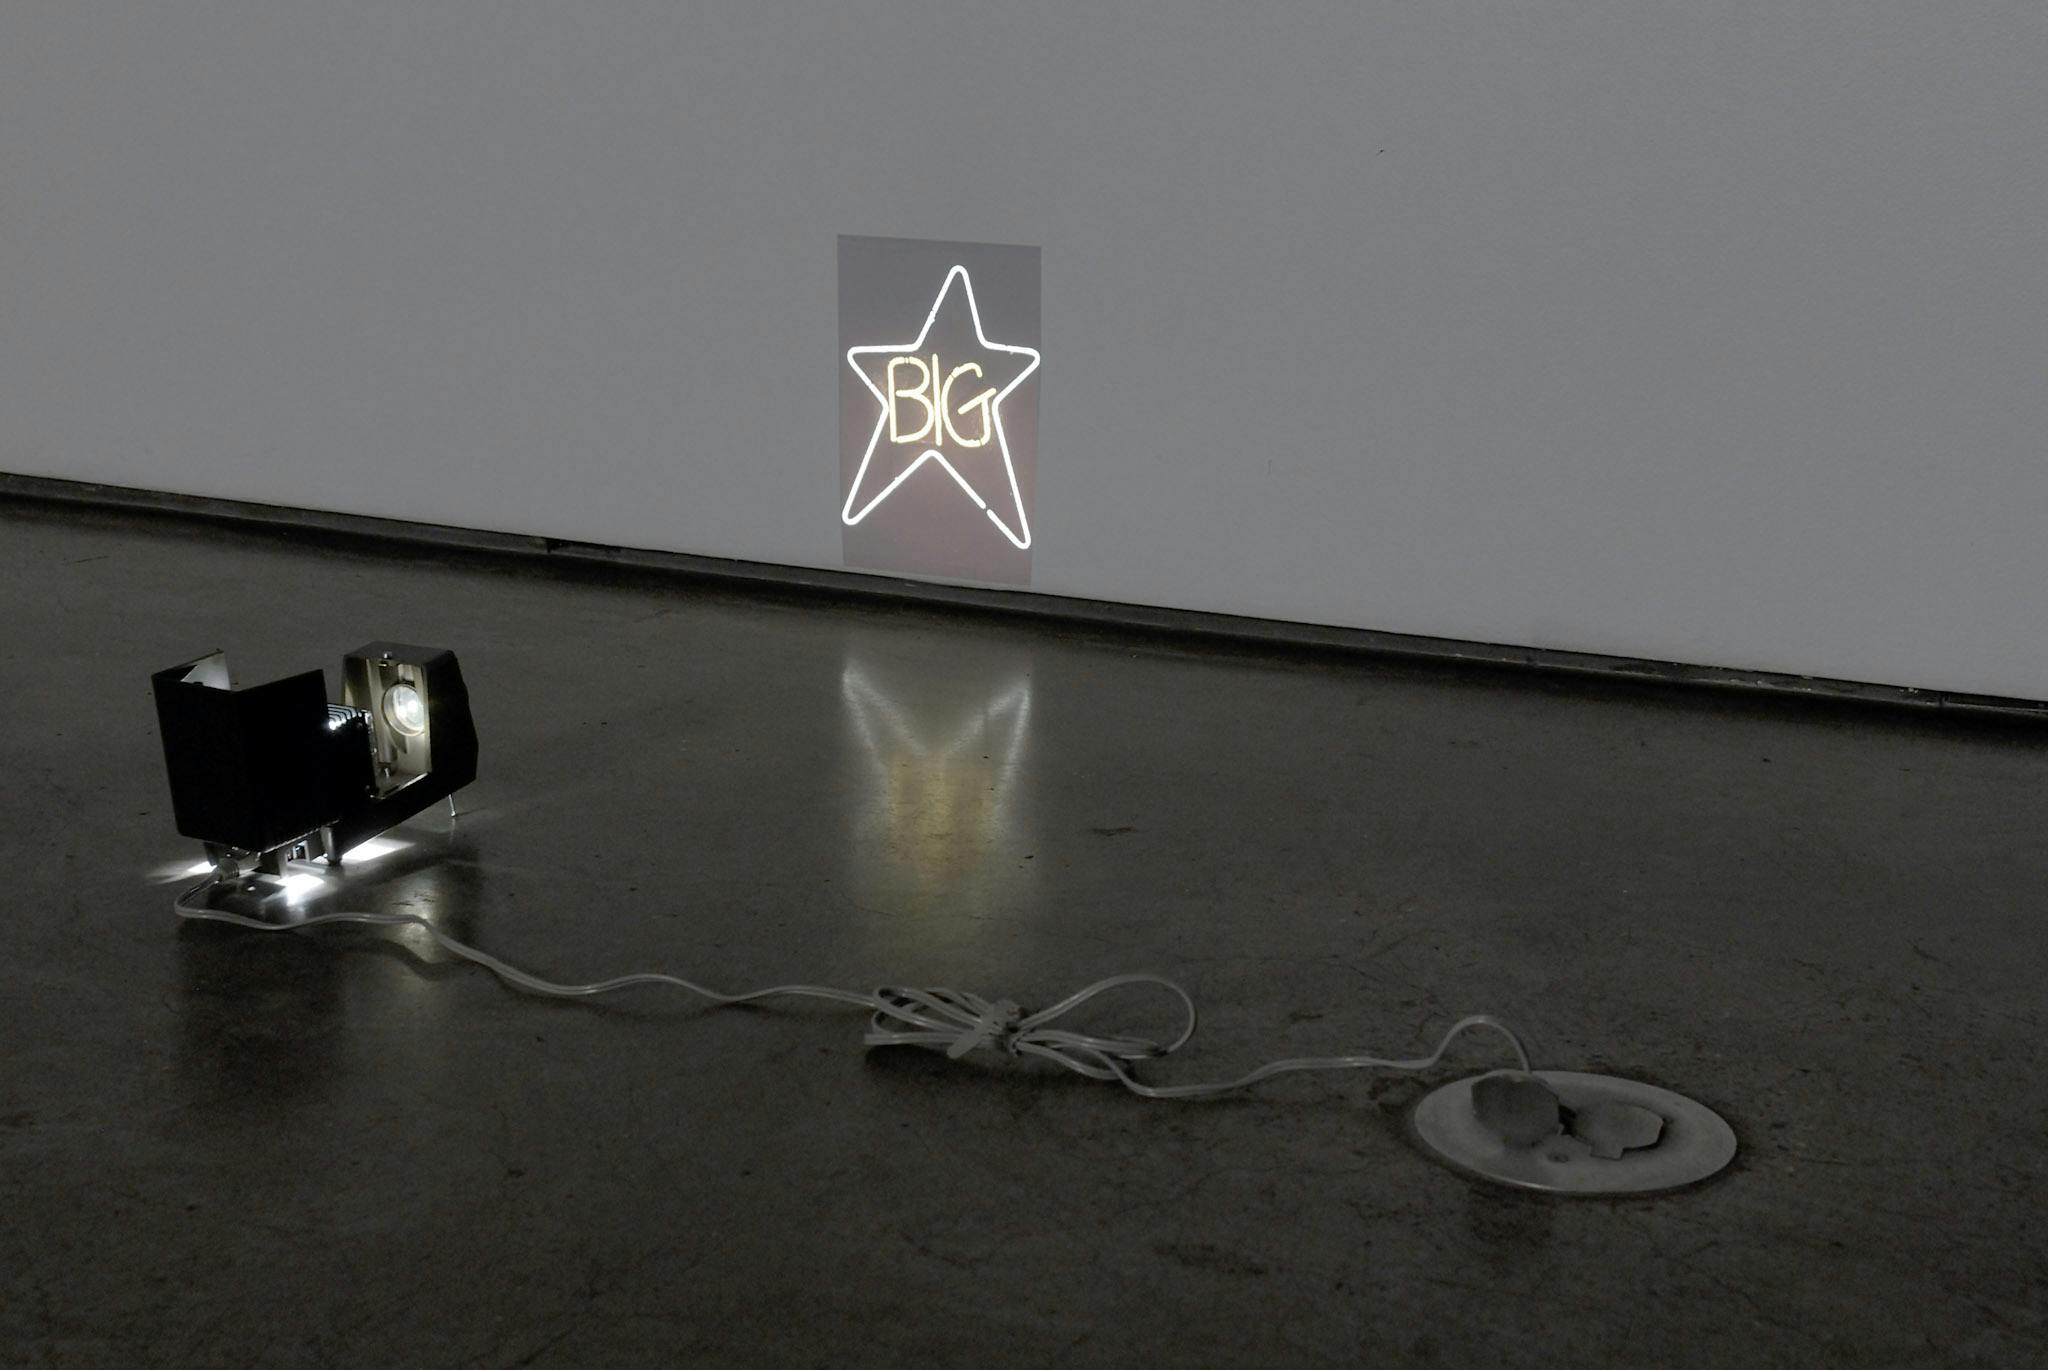 A small light is placed on the gallery floor. The shape of this light resembles an old accordion camera. It projects a shape of a star, with the word BIG written inside, on the wall.